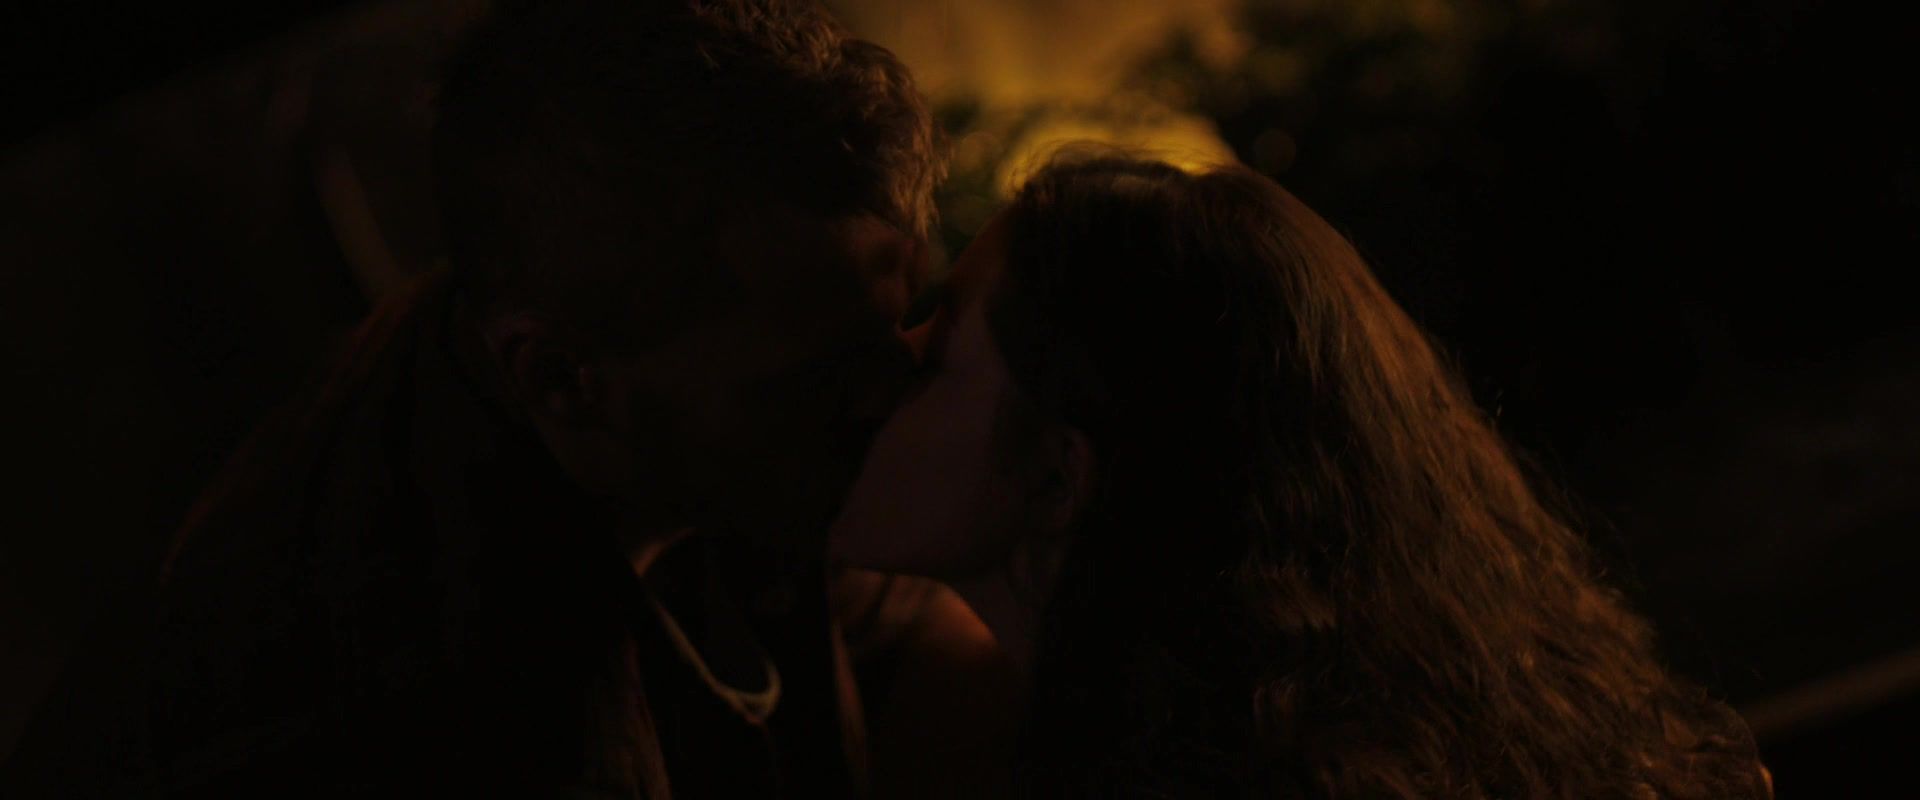 Gay Deepthroat Olivia Thirlby nude - Above the Shadows (2019) LovNymph